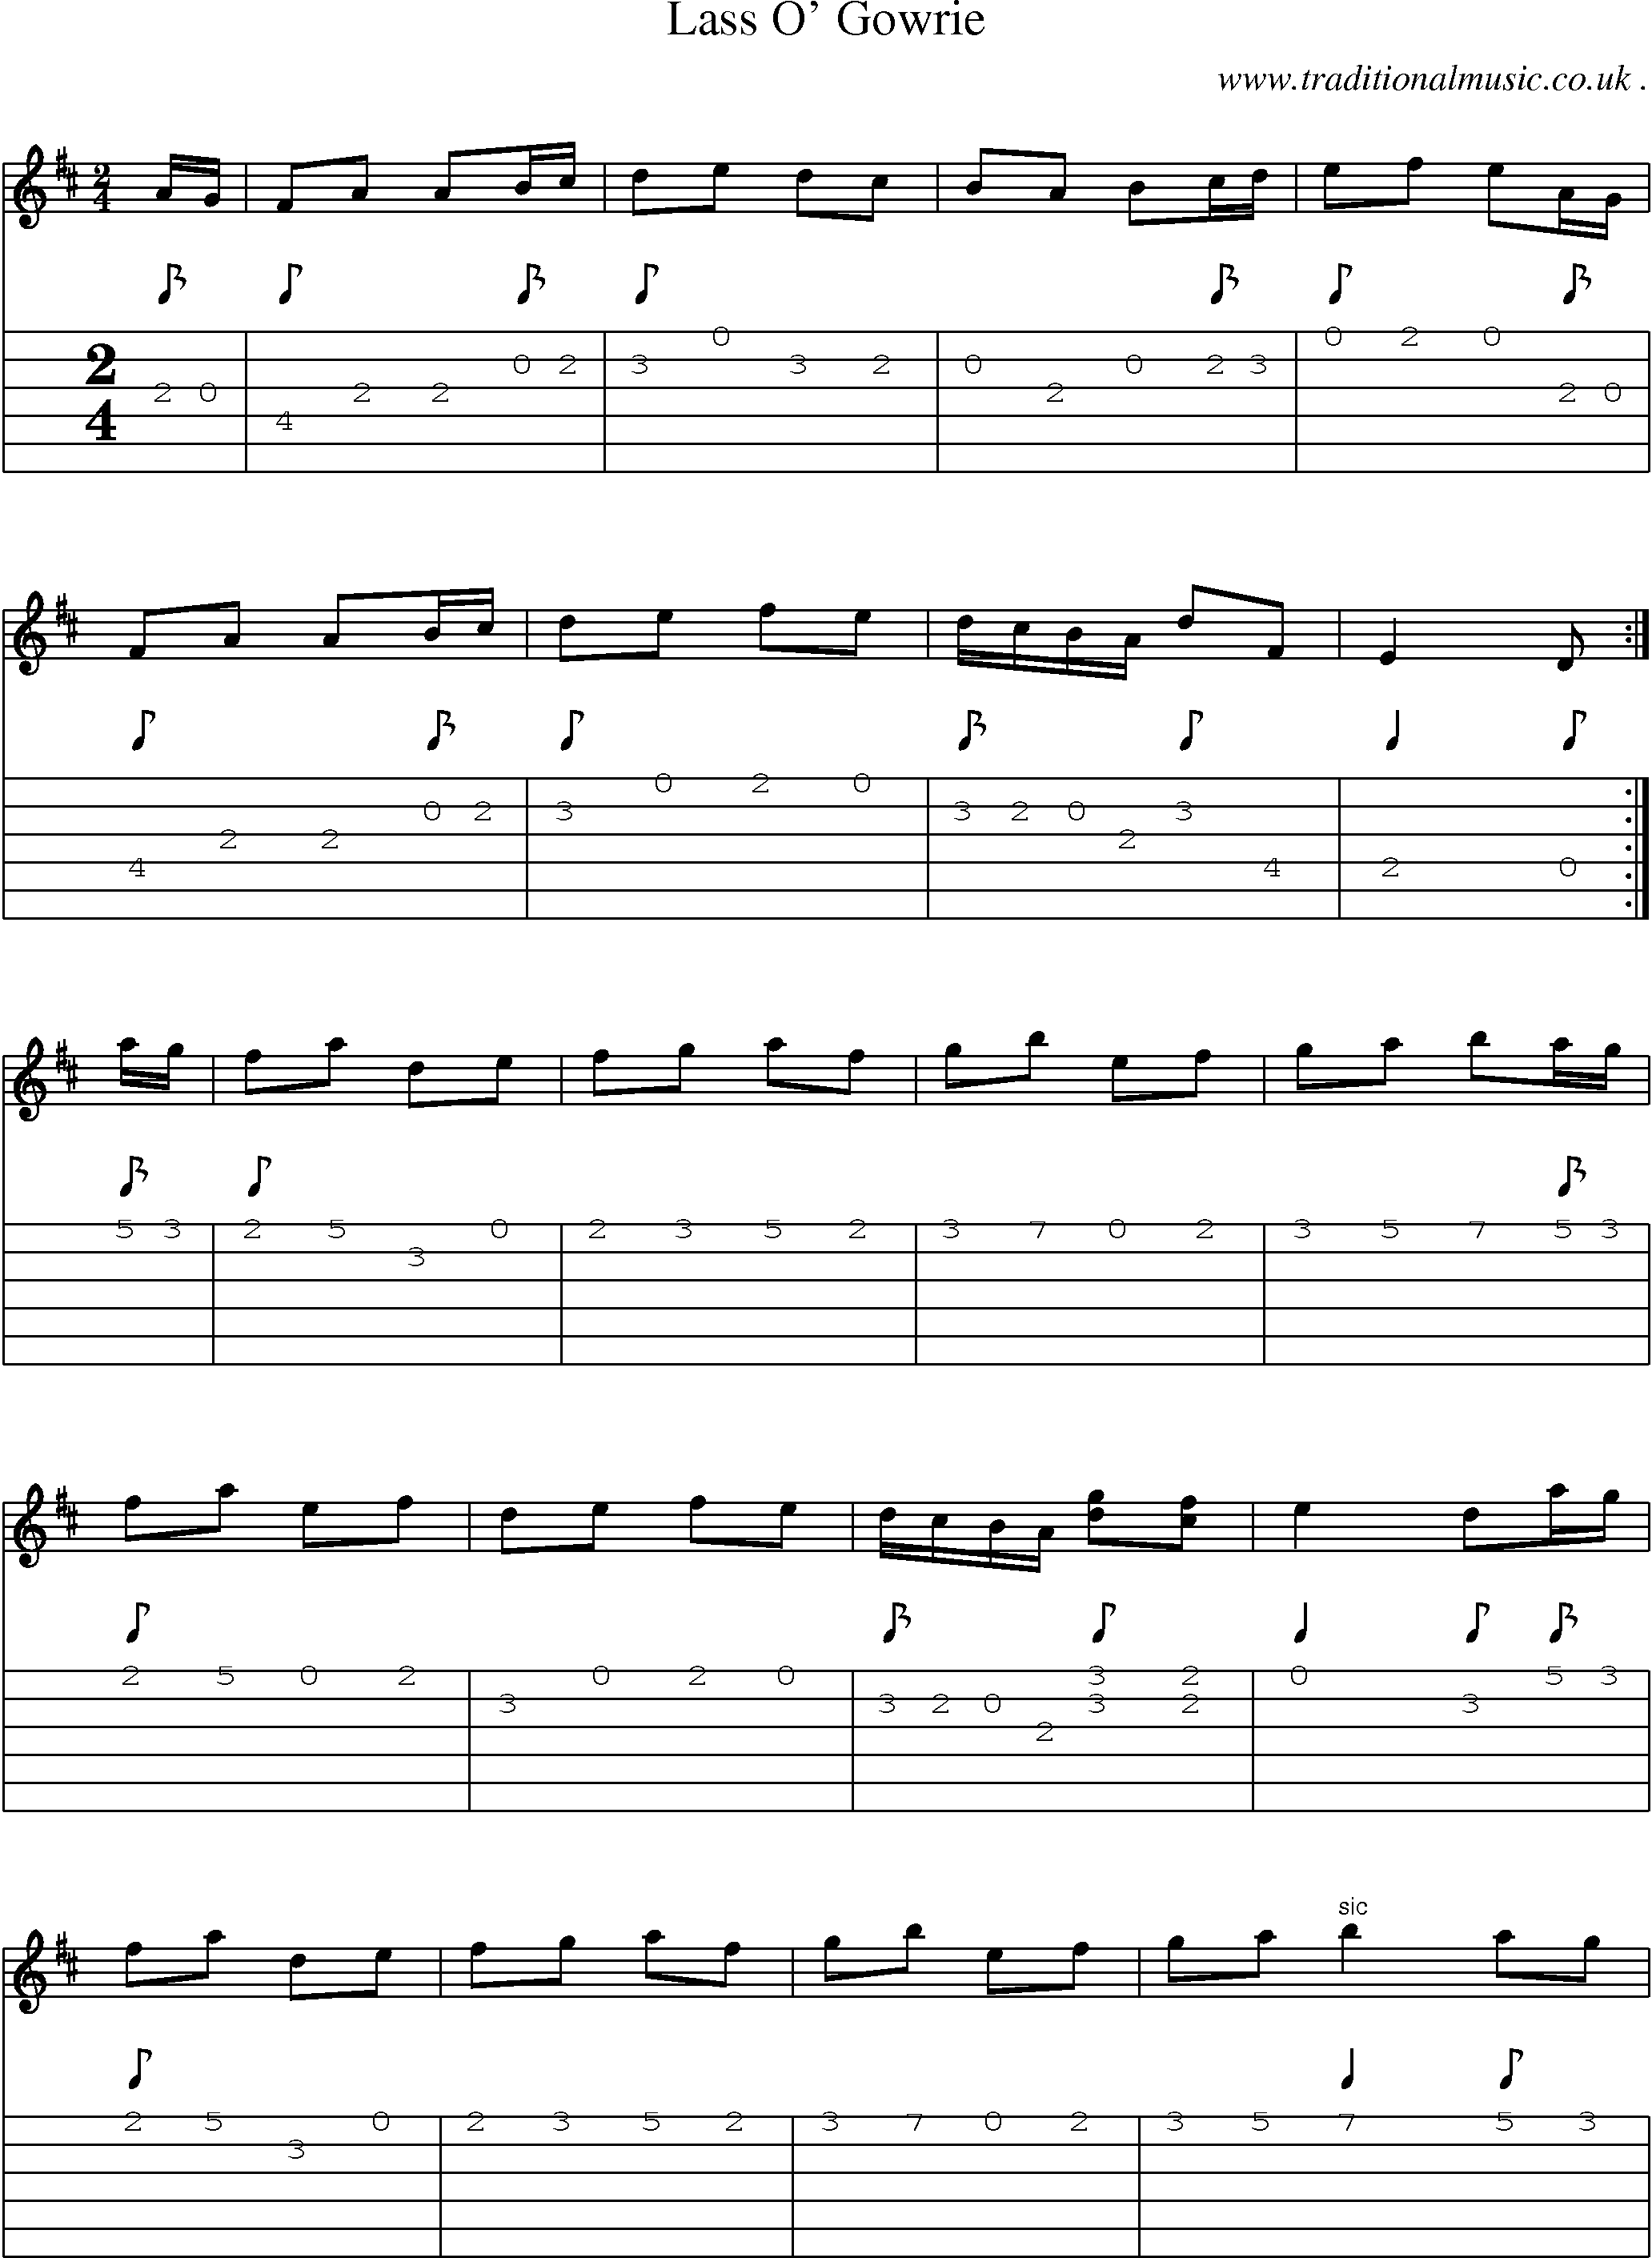 Sheet-Music and Guitar Tabs for Lass O Gowrie